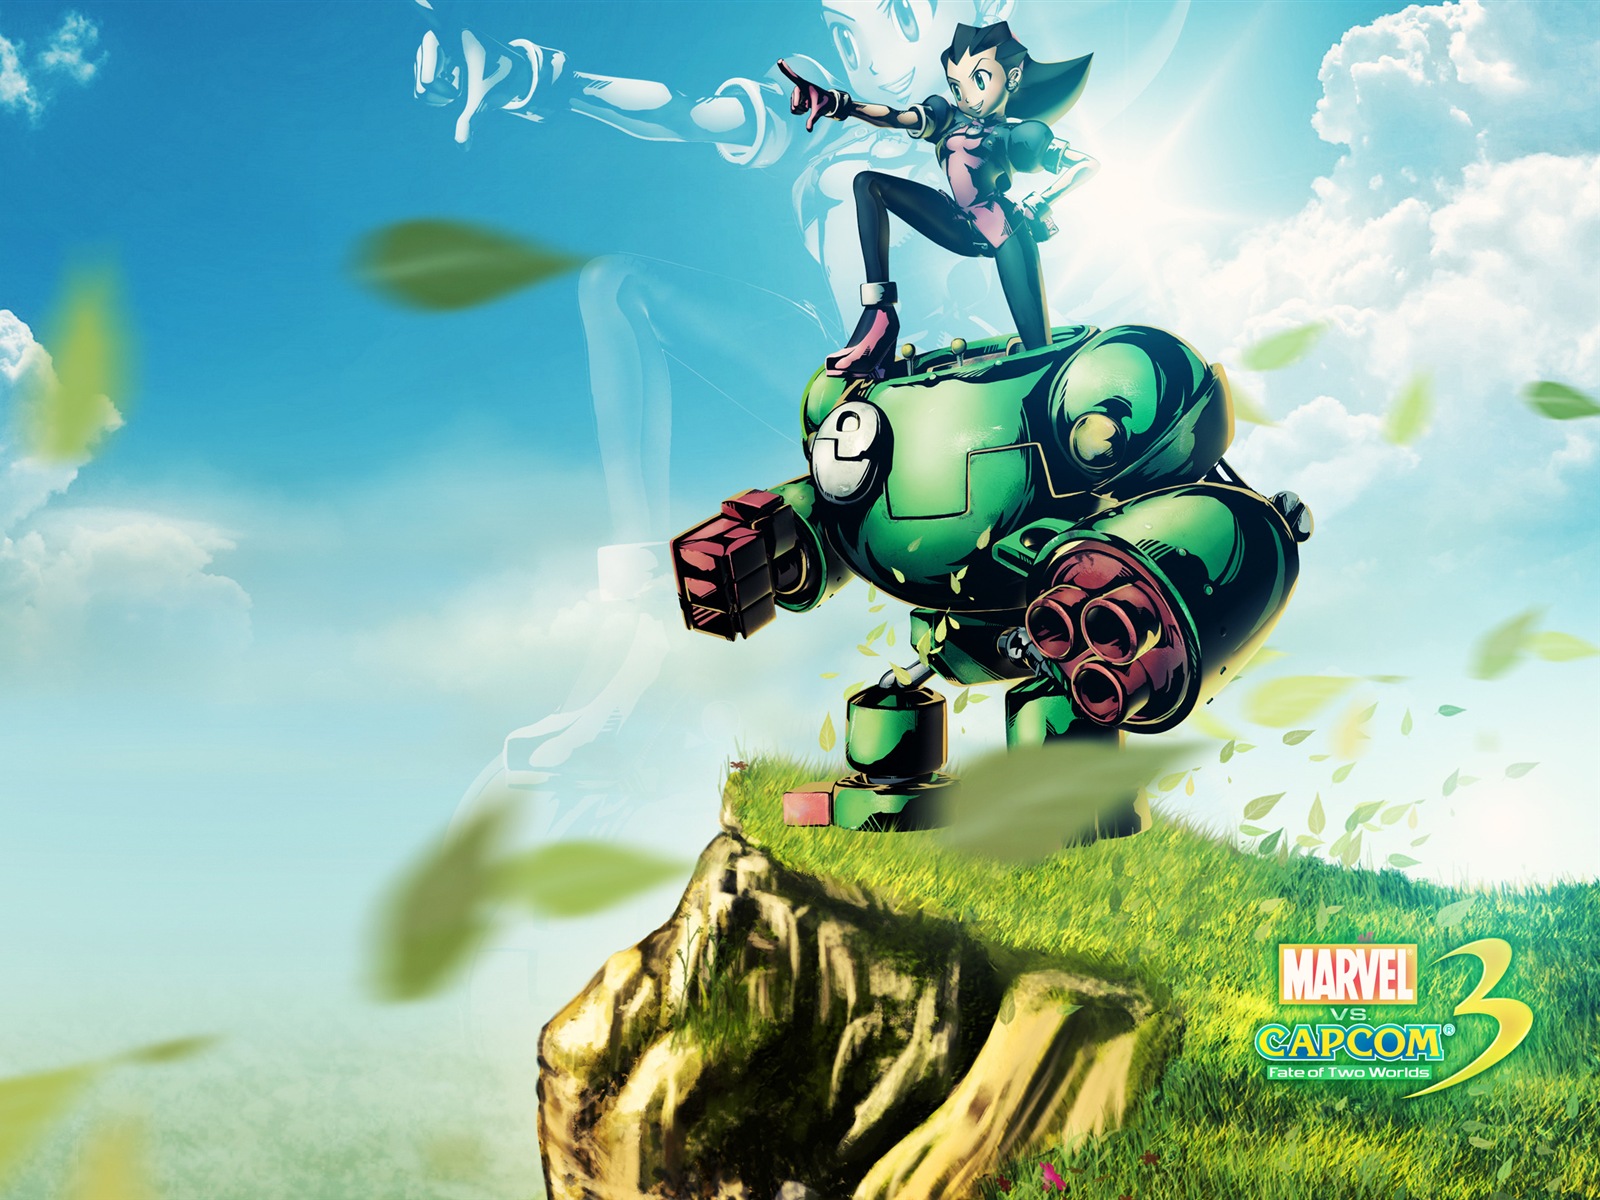 Marvel VS. Capcom 3: Fate of Two Worlds HD game wallpapers #26 - 1600x1200